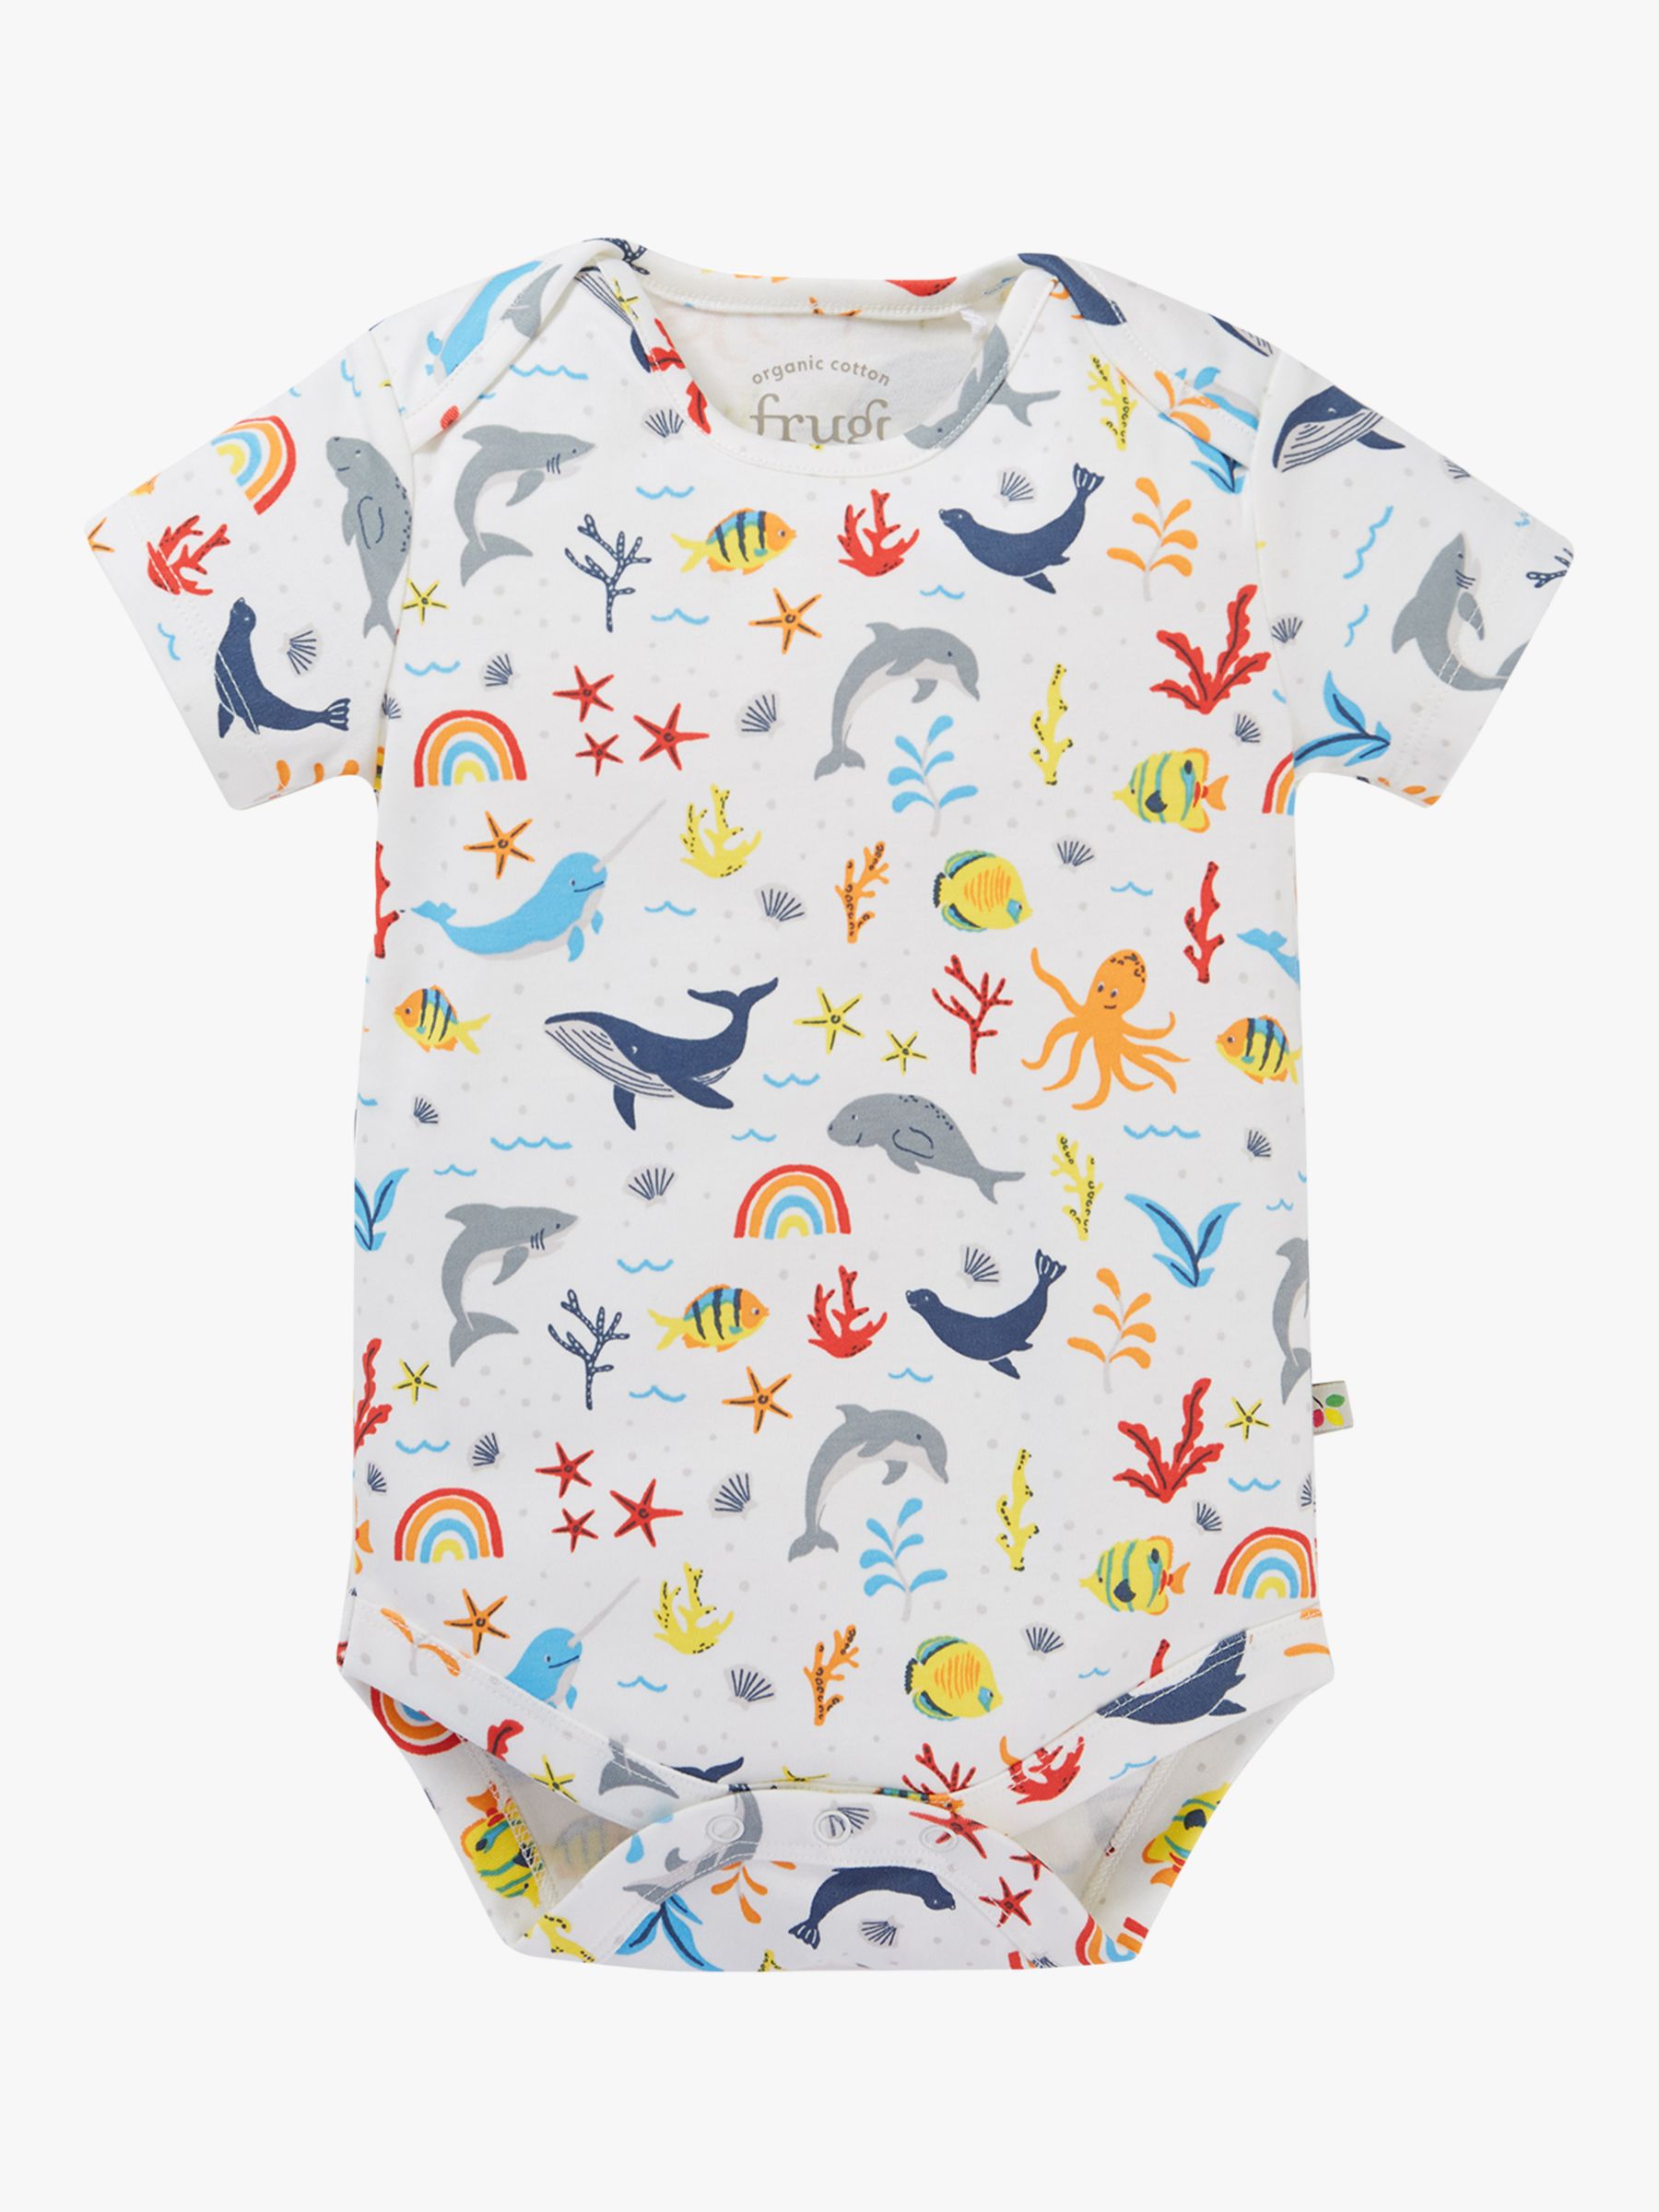 Buy Frugi Baby Organic Cotton Super Special Bodysuits, Pack Of 2, Multi Online at johnlewis.com